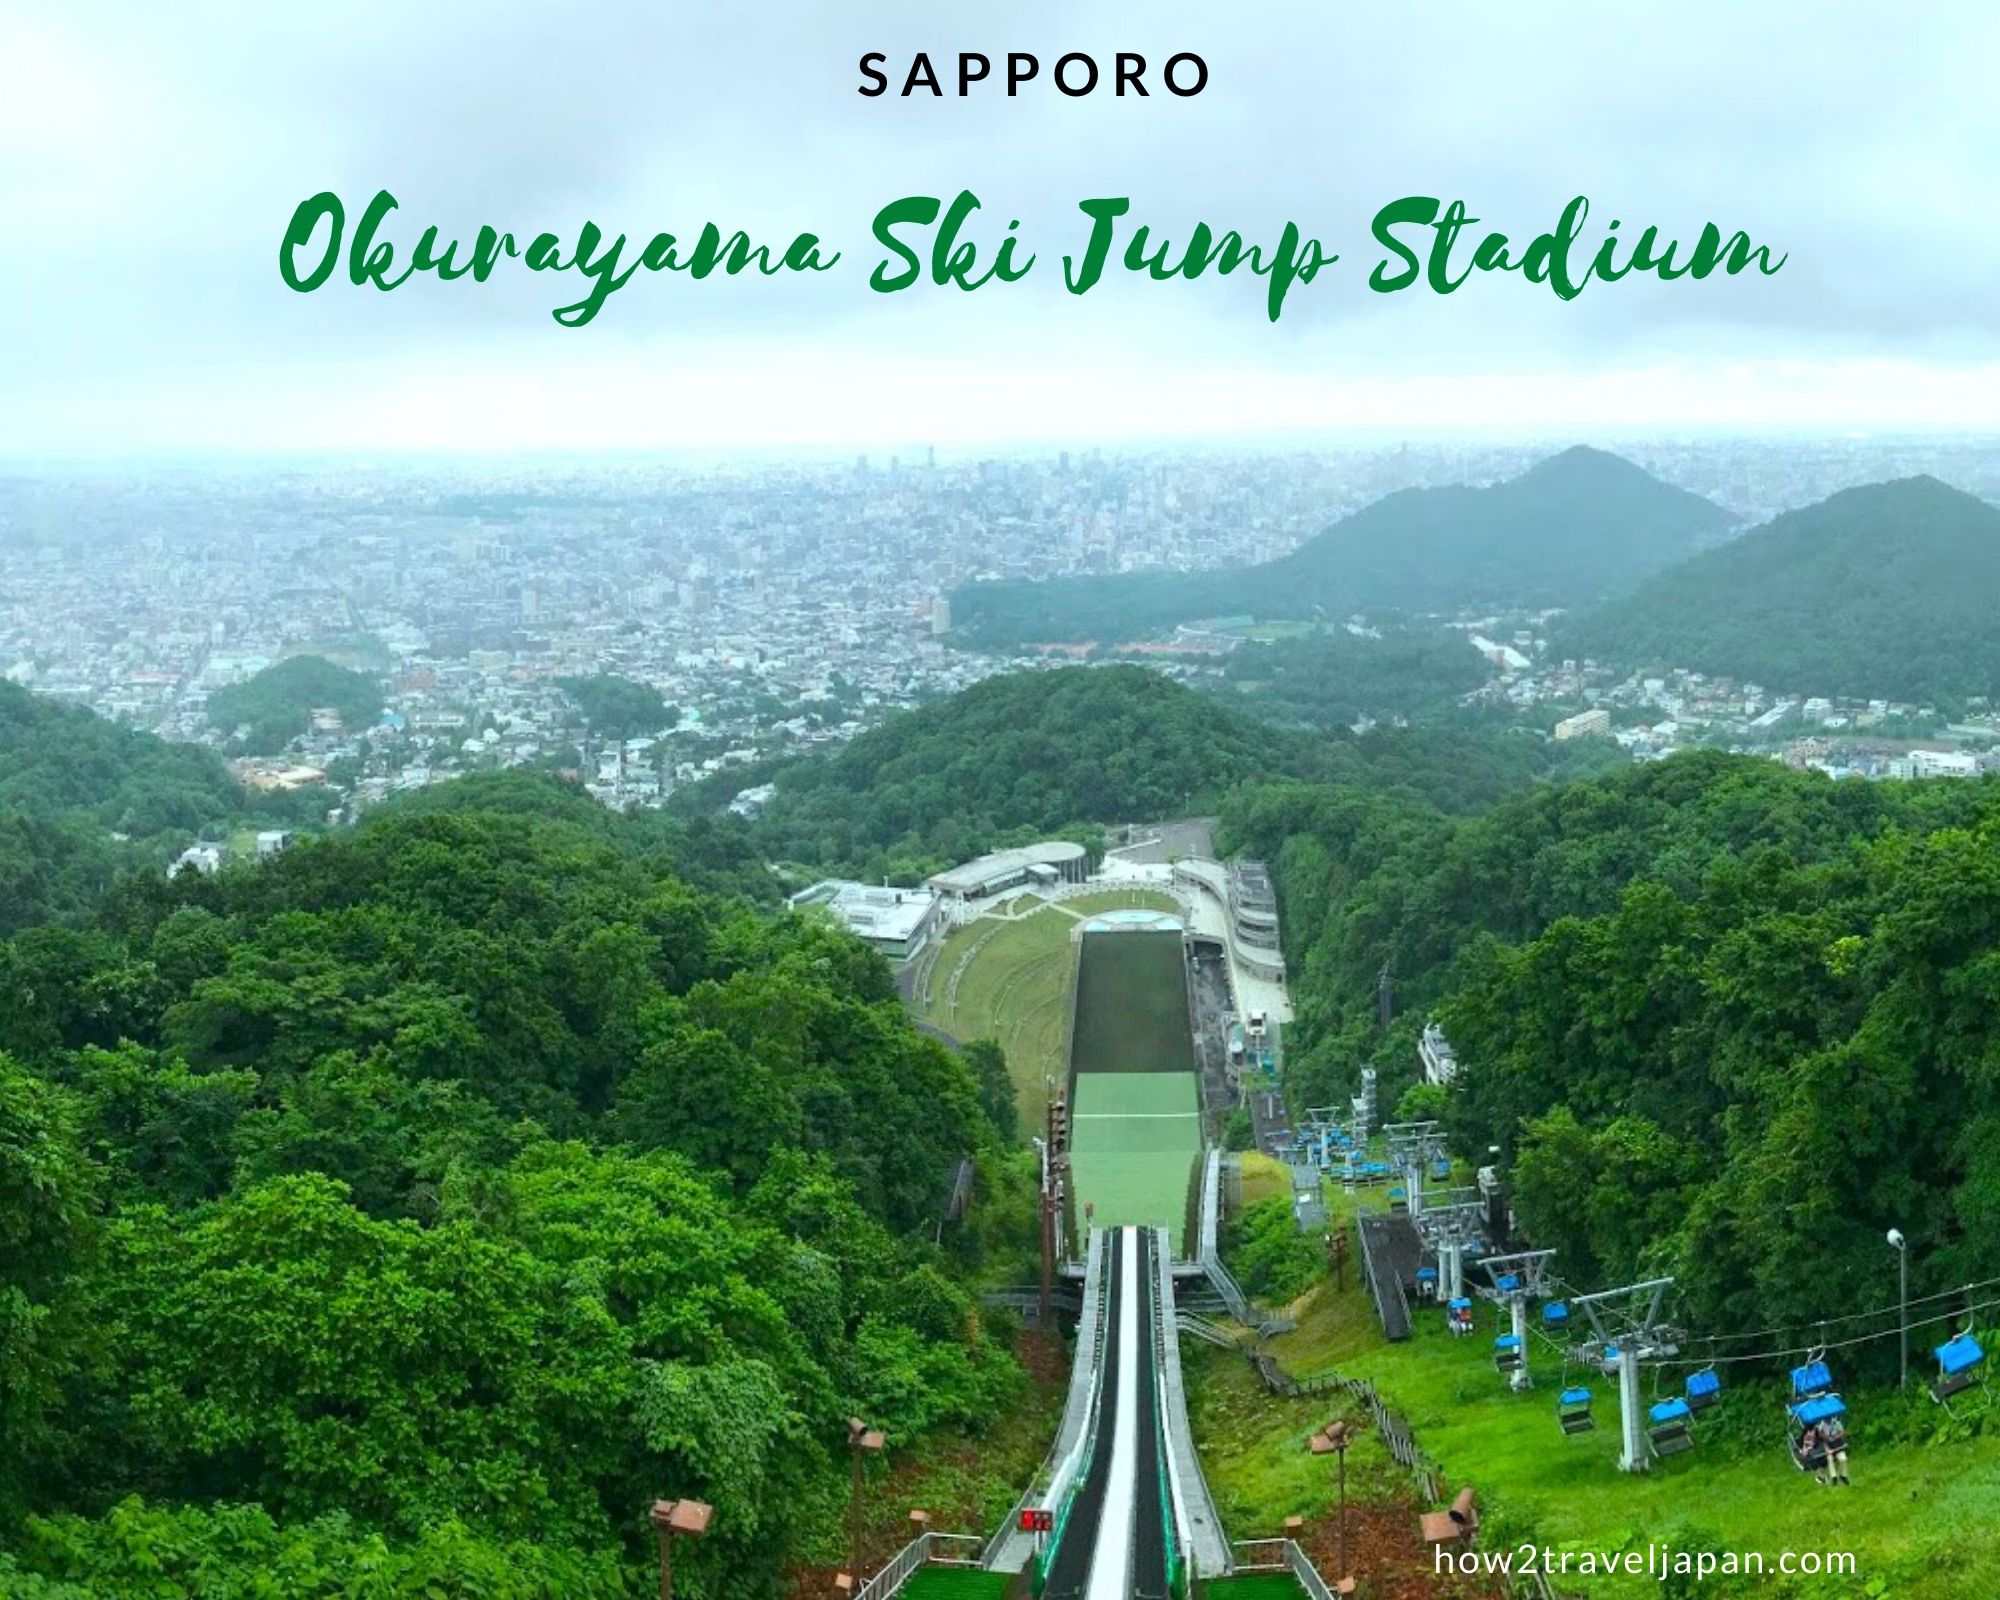 You are currently viewing Okurayama Ski Jump Stadium in Sapporo, the ski jump stage of the Sapporo Olympic